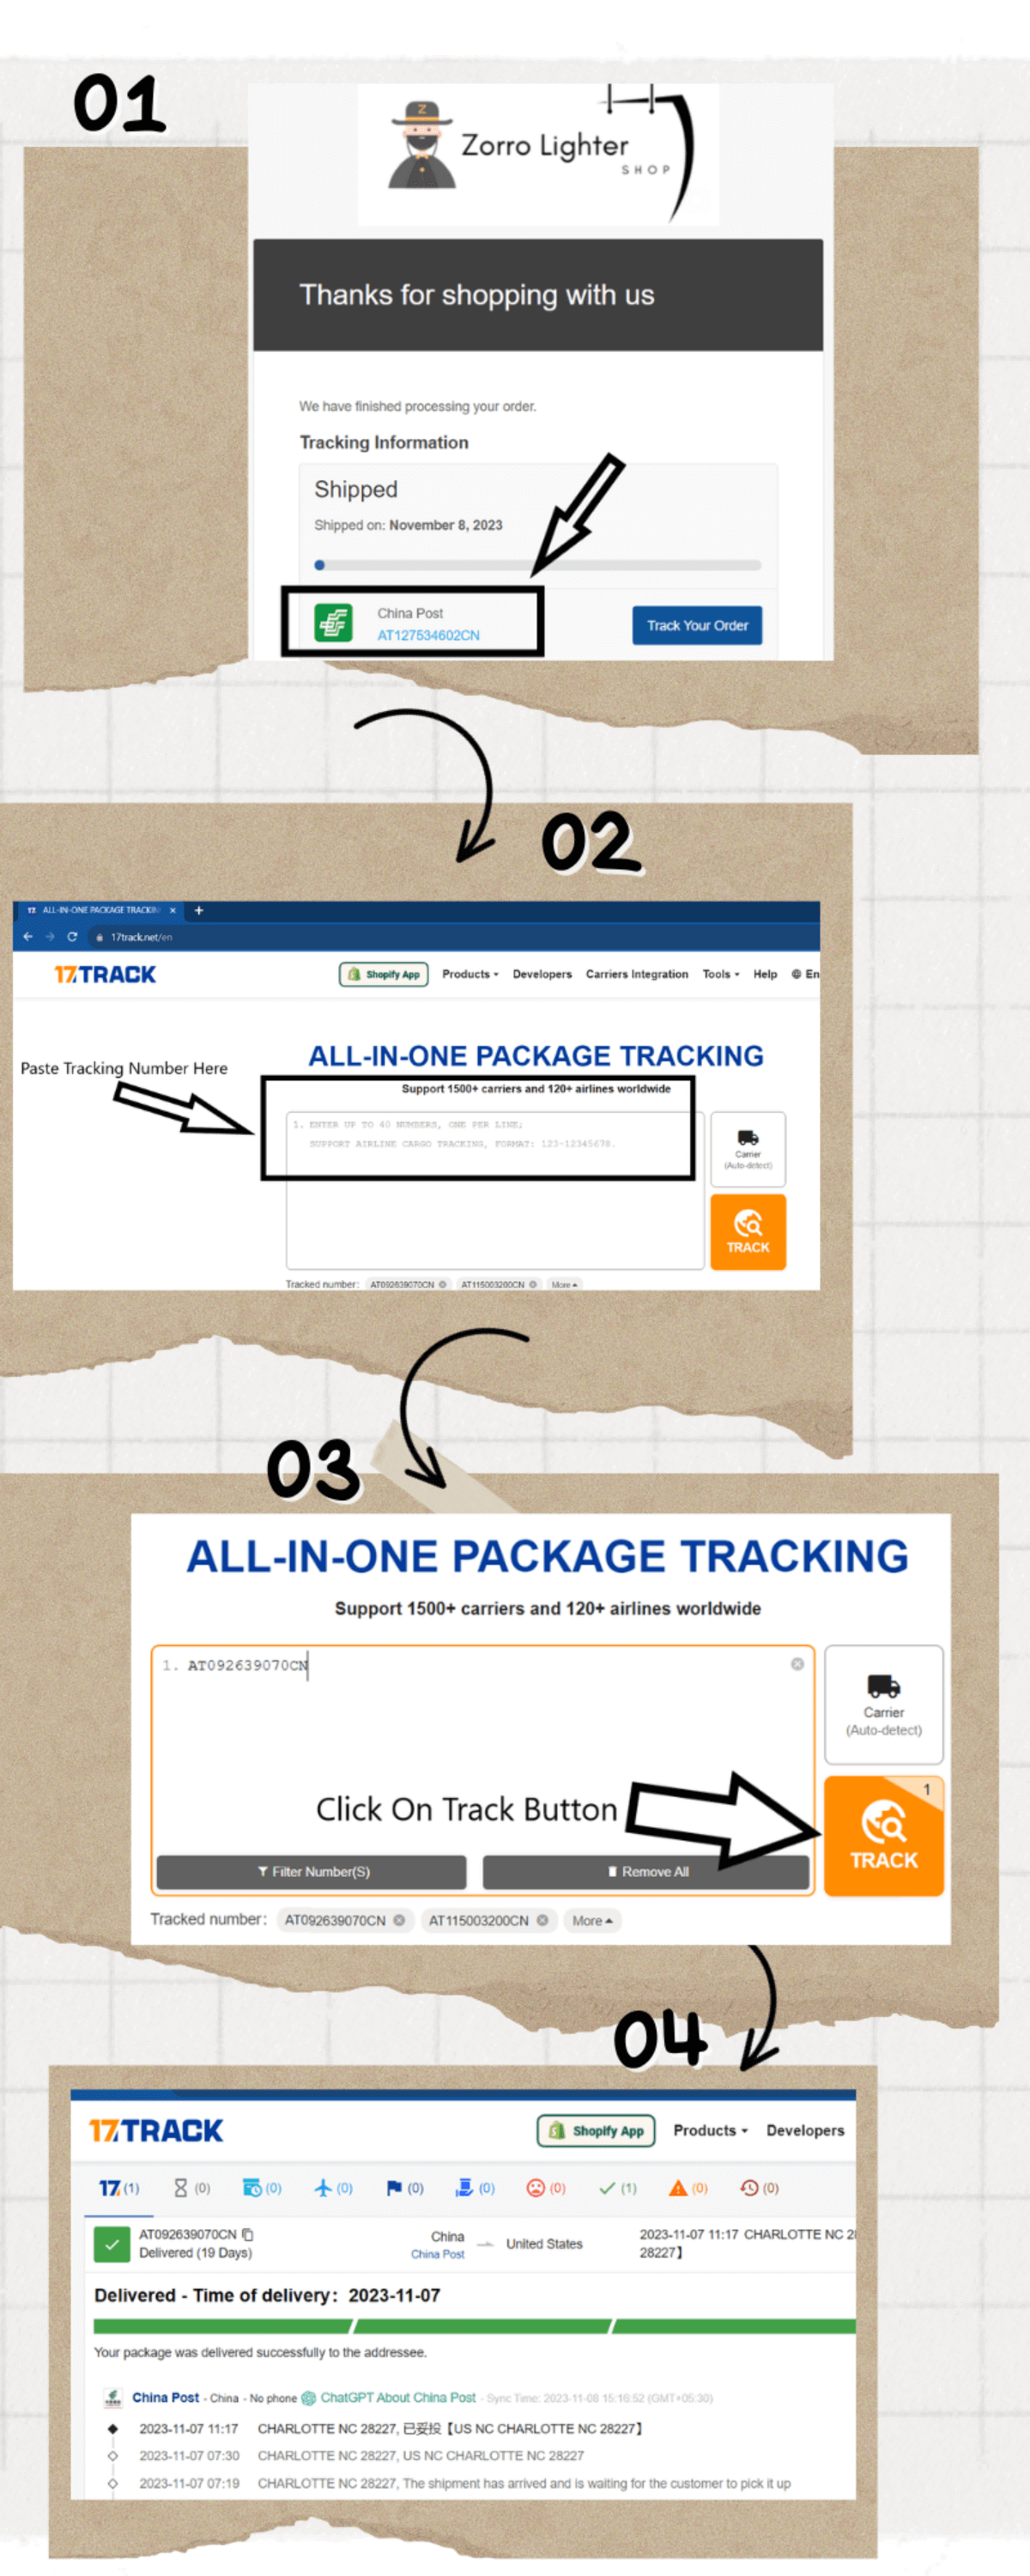 How to track your package zorro lighters website